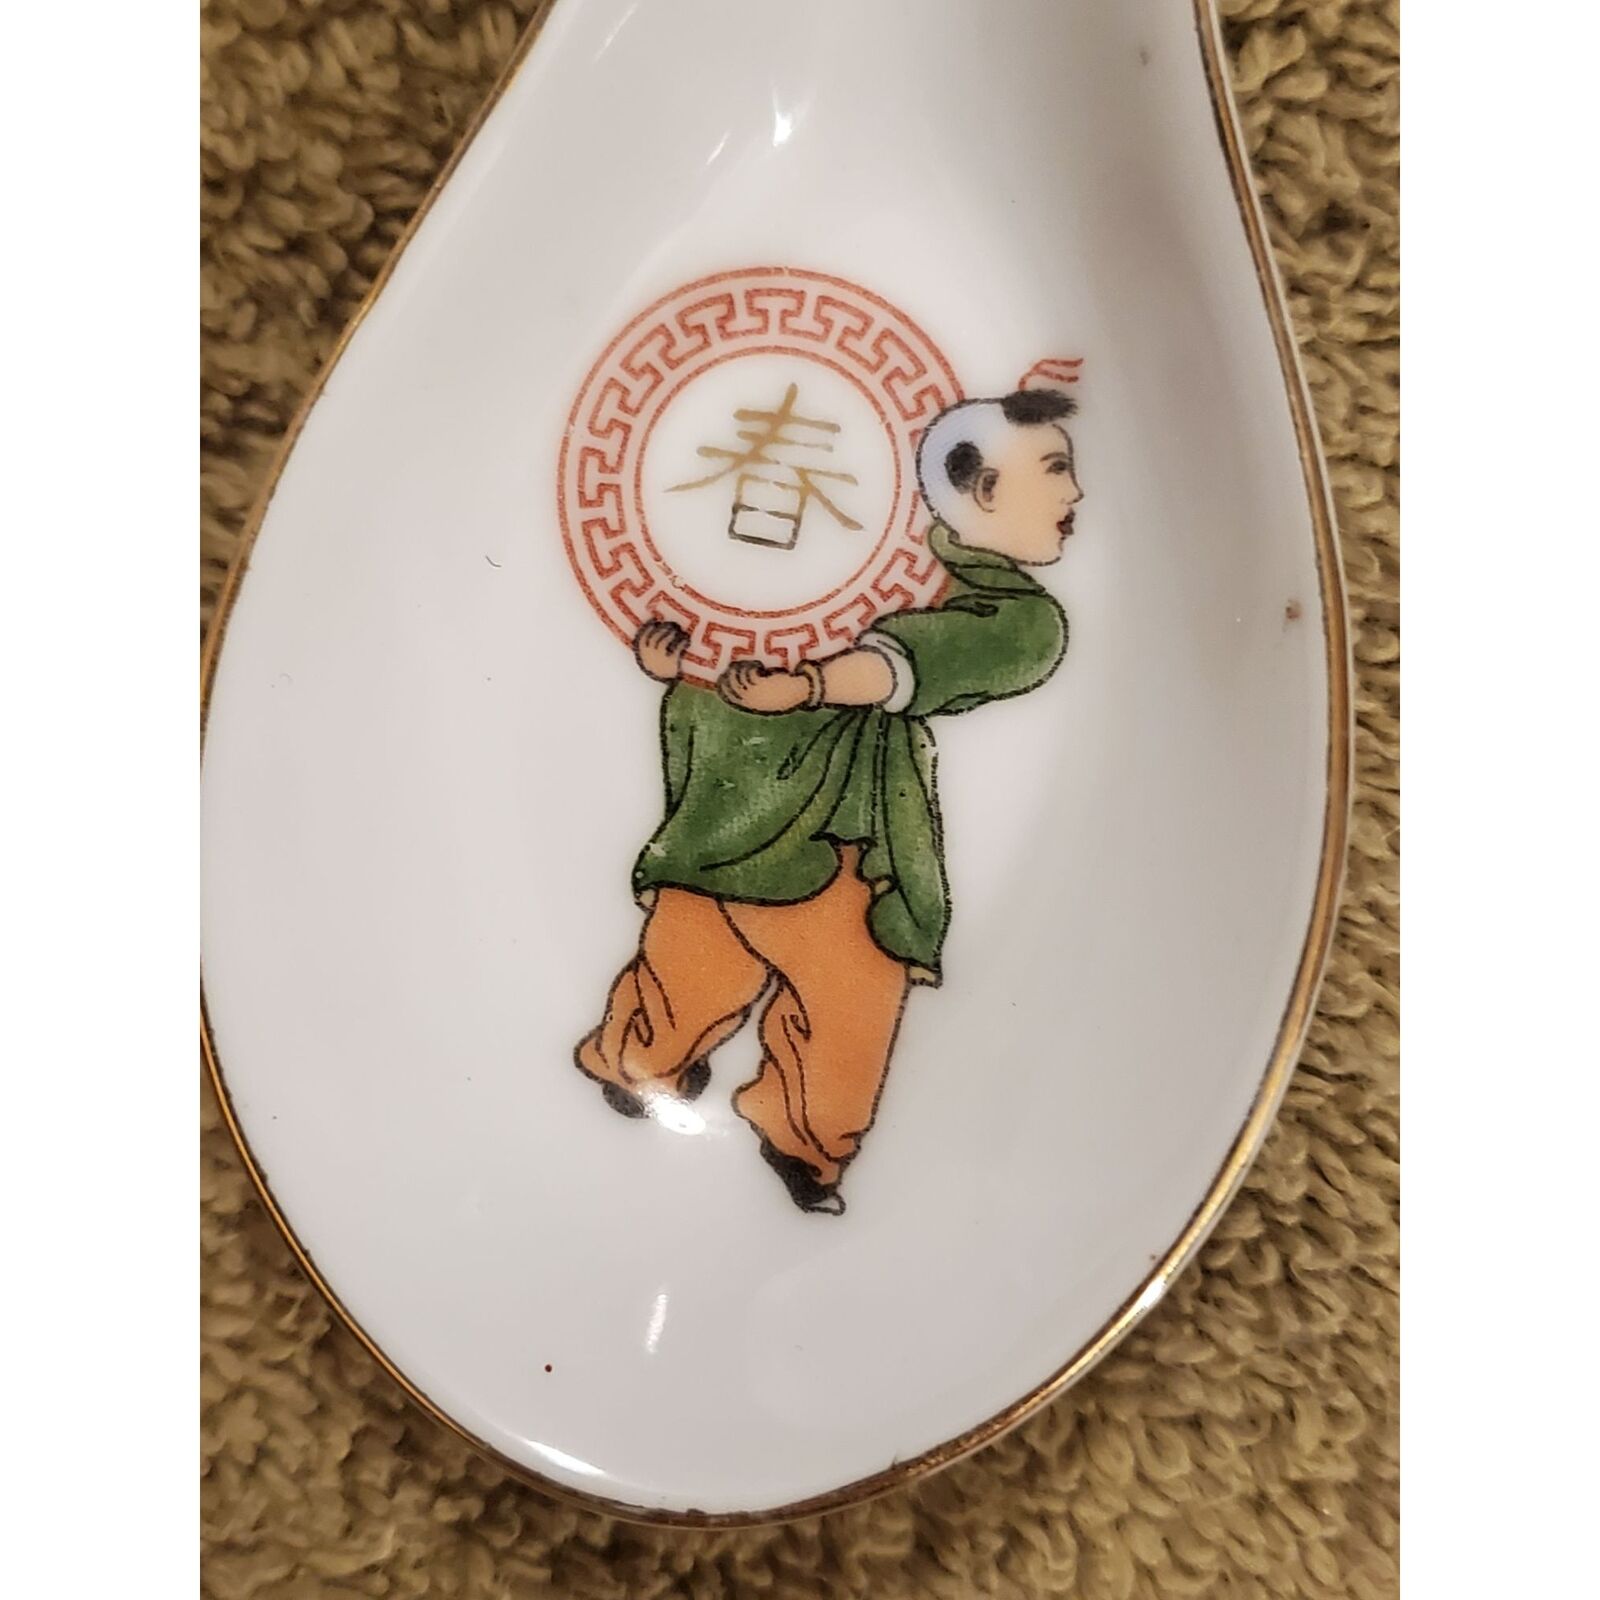 Vintage Chinese Porcelain Spoon With Boy Holding Symbol Design